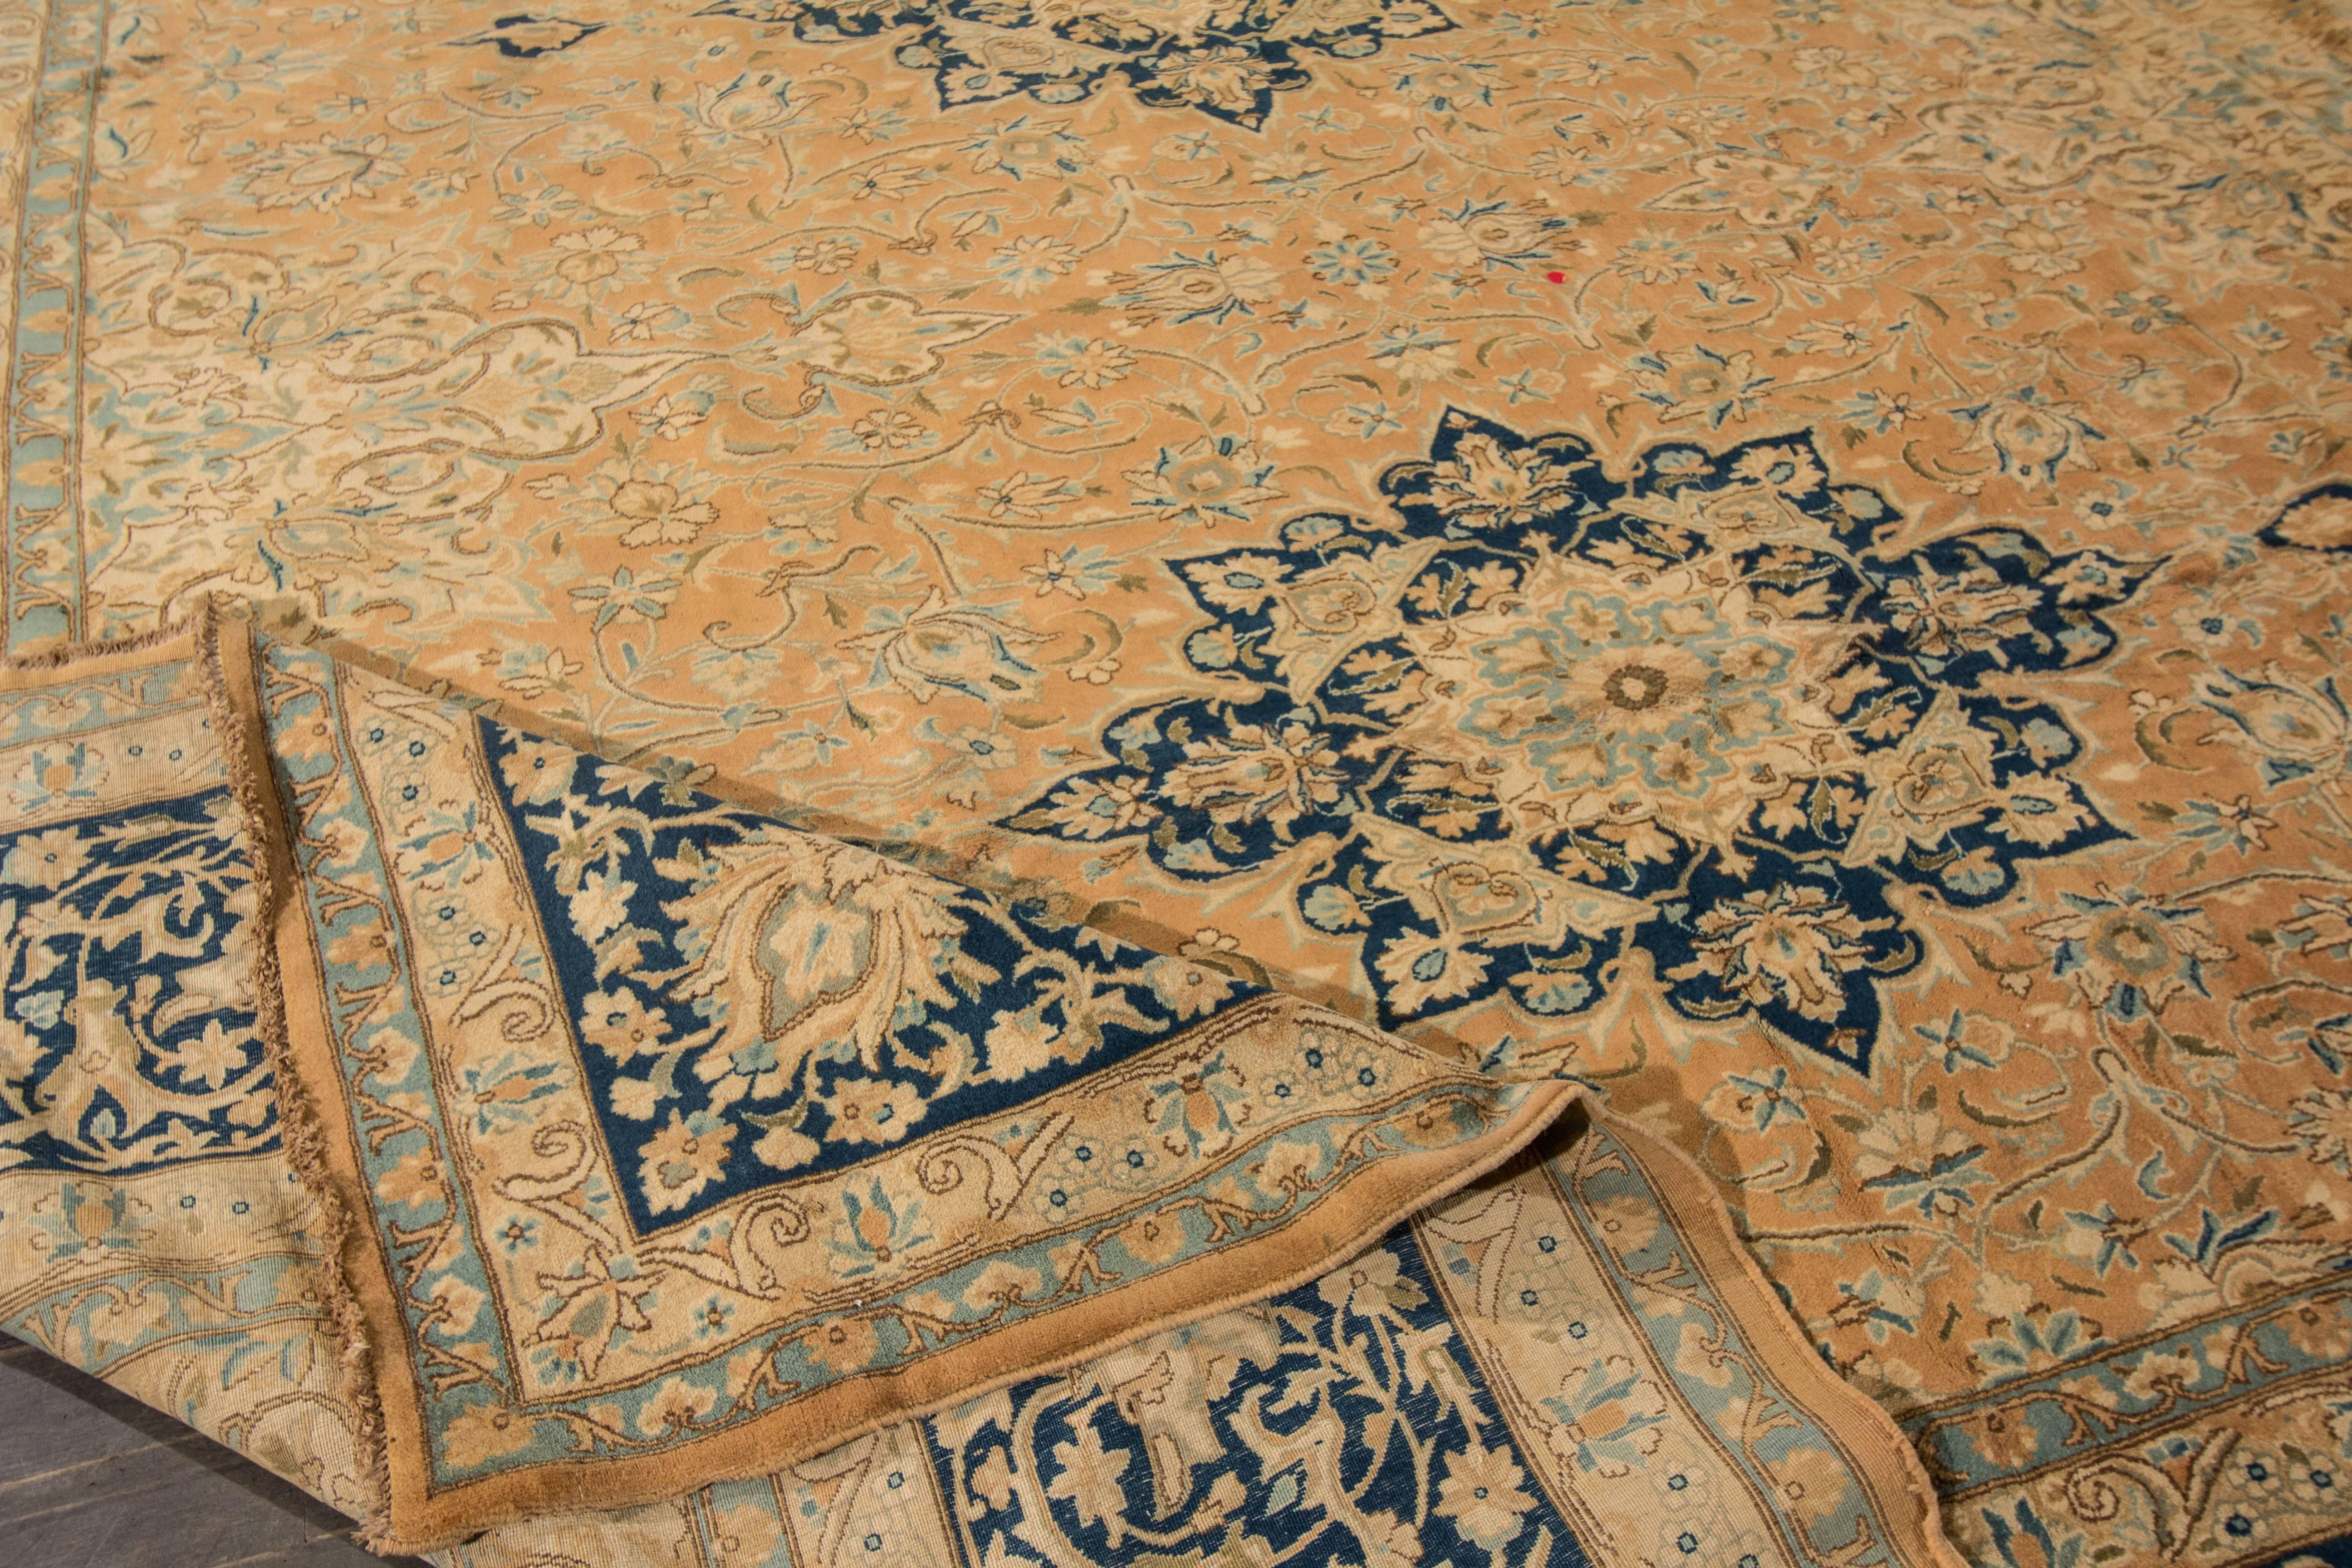 Measures: 12'.2 x 17'.6.
This beautiful hand-knotted design rug will make your floor look splendid. This collection is made in wool.